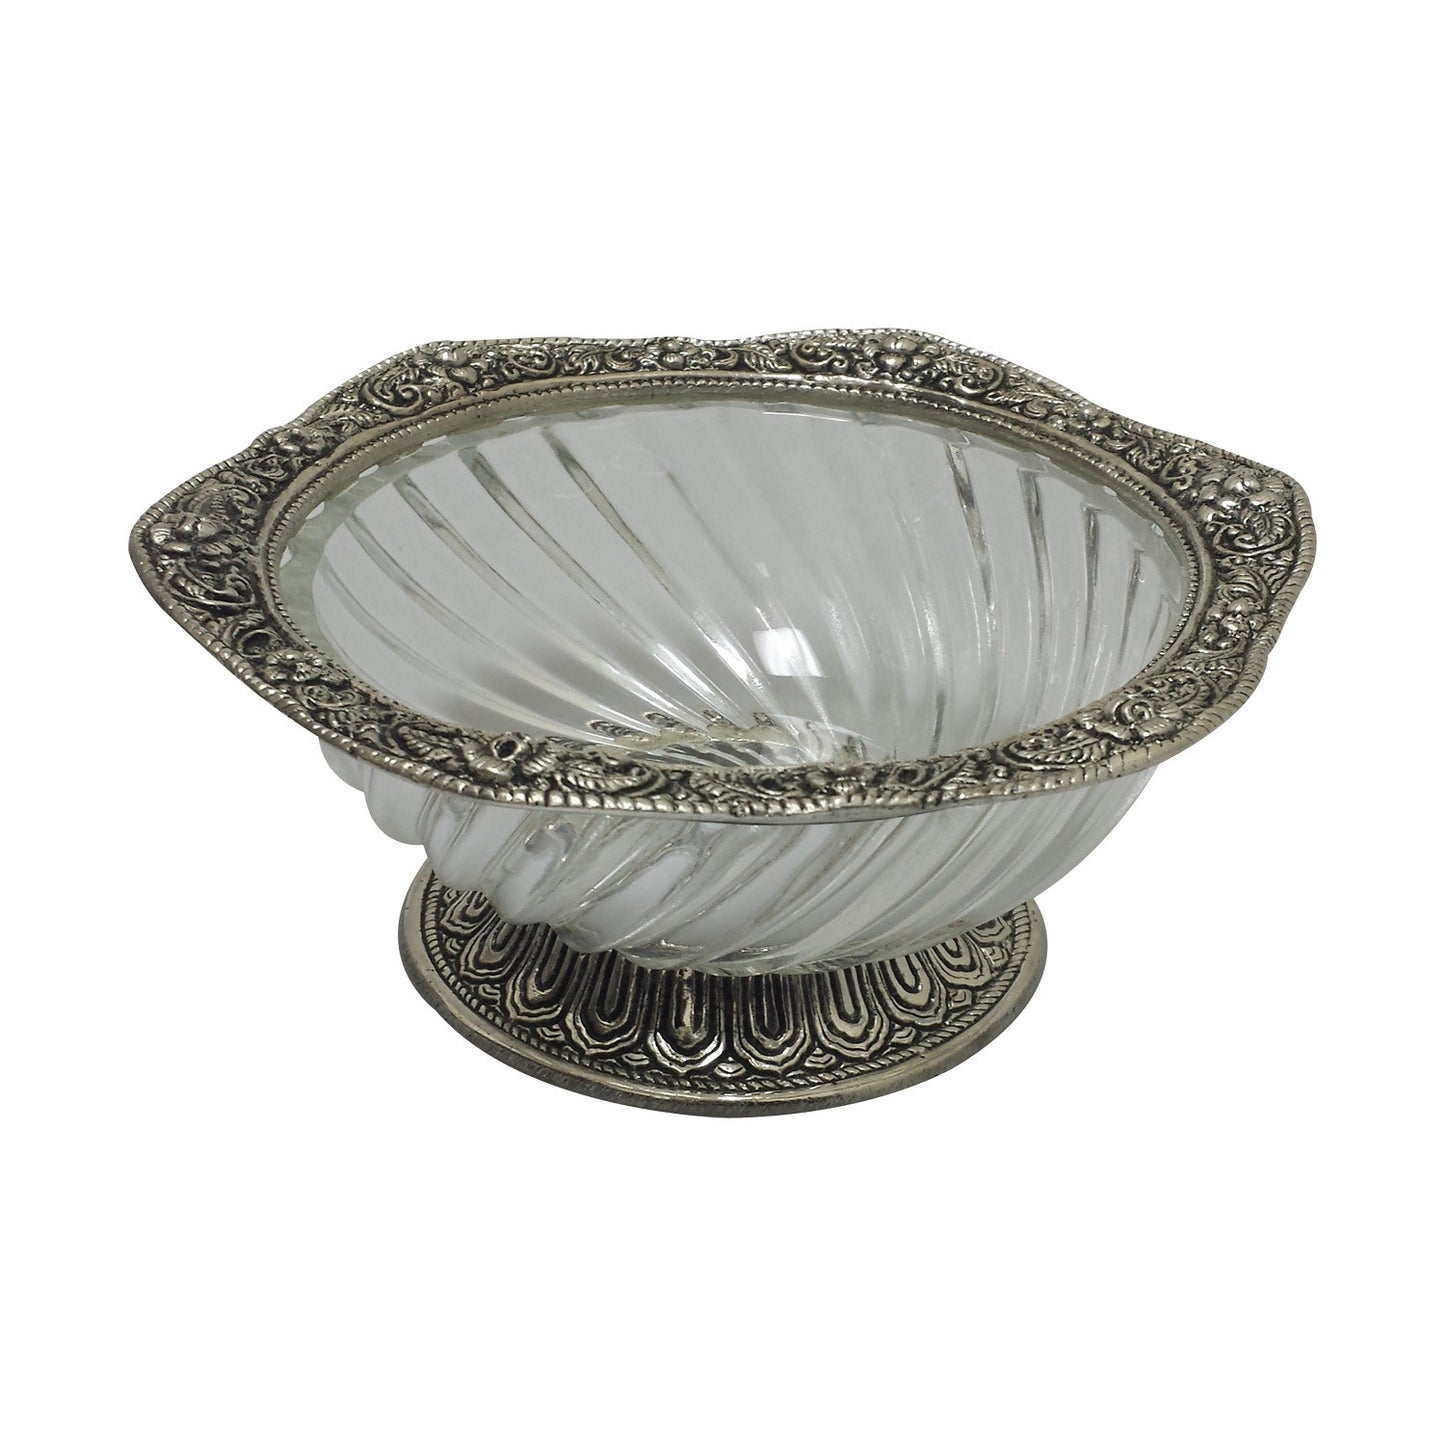 GiftBay 634 Beautiful Serving Dish with Antique Silver Finish Trim,6" Length